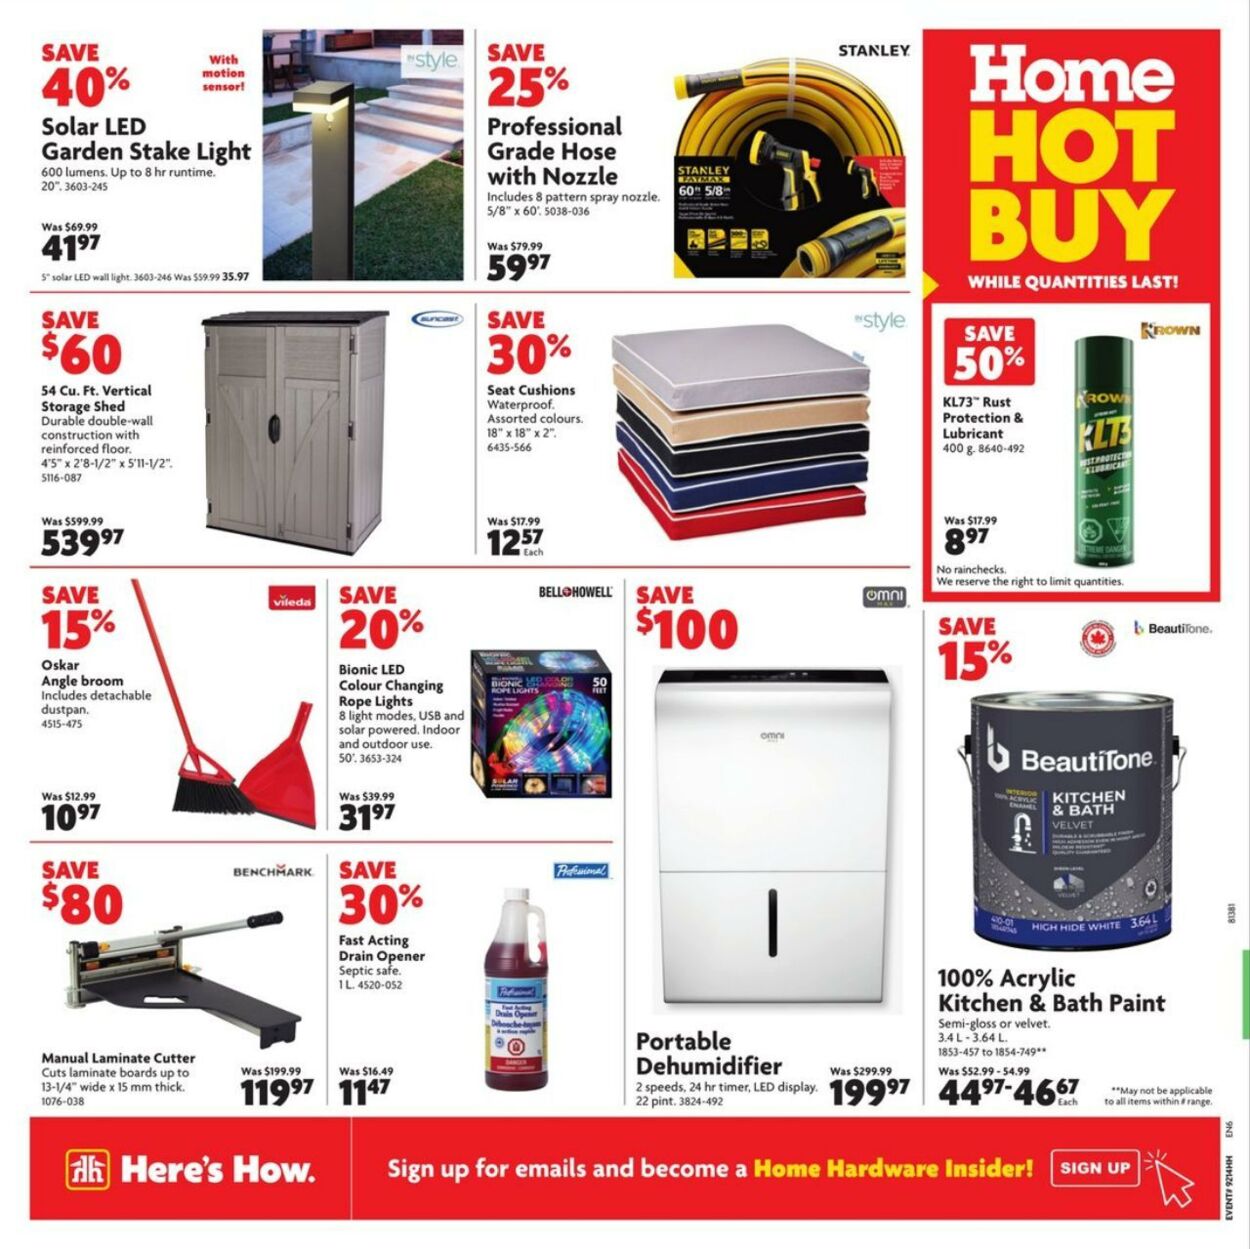 Home Hardware Flyer from 04/04/2024